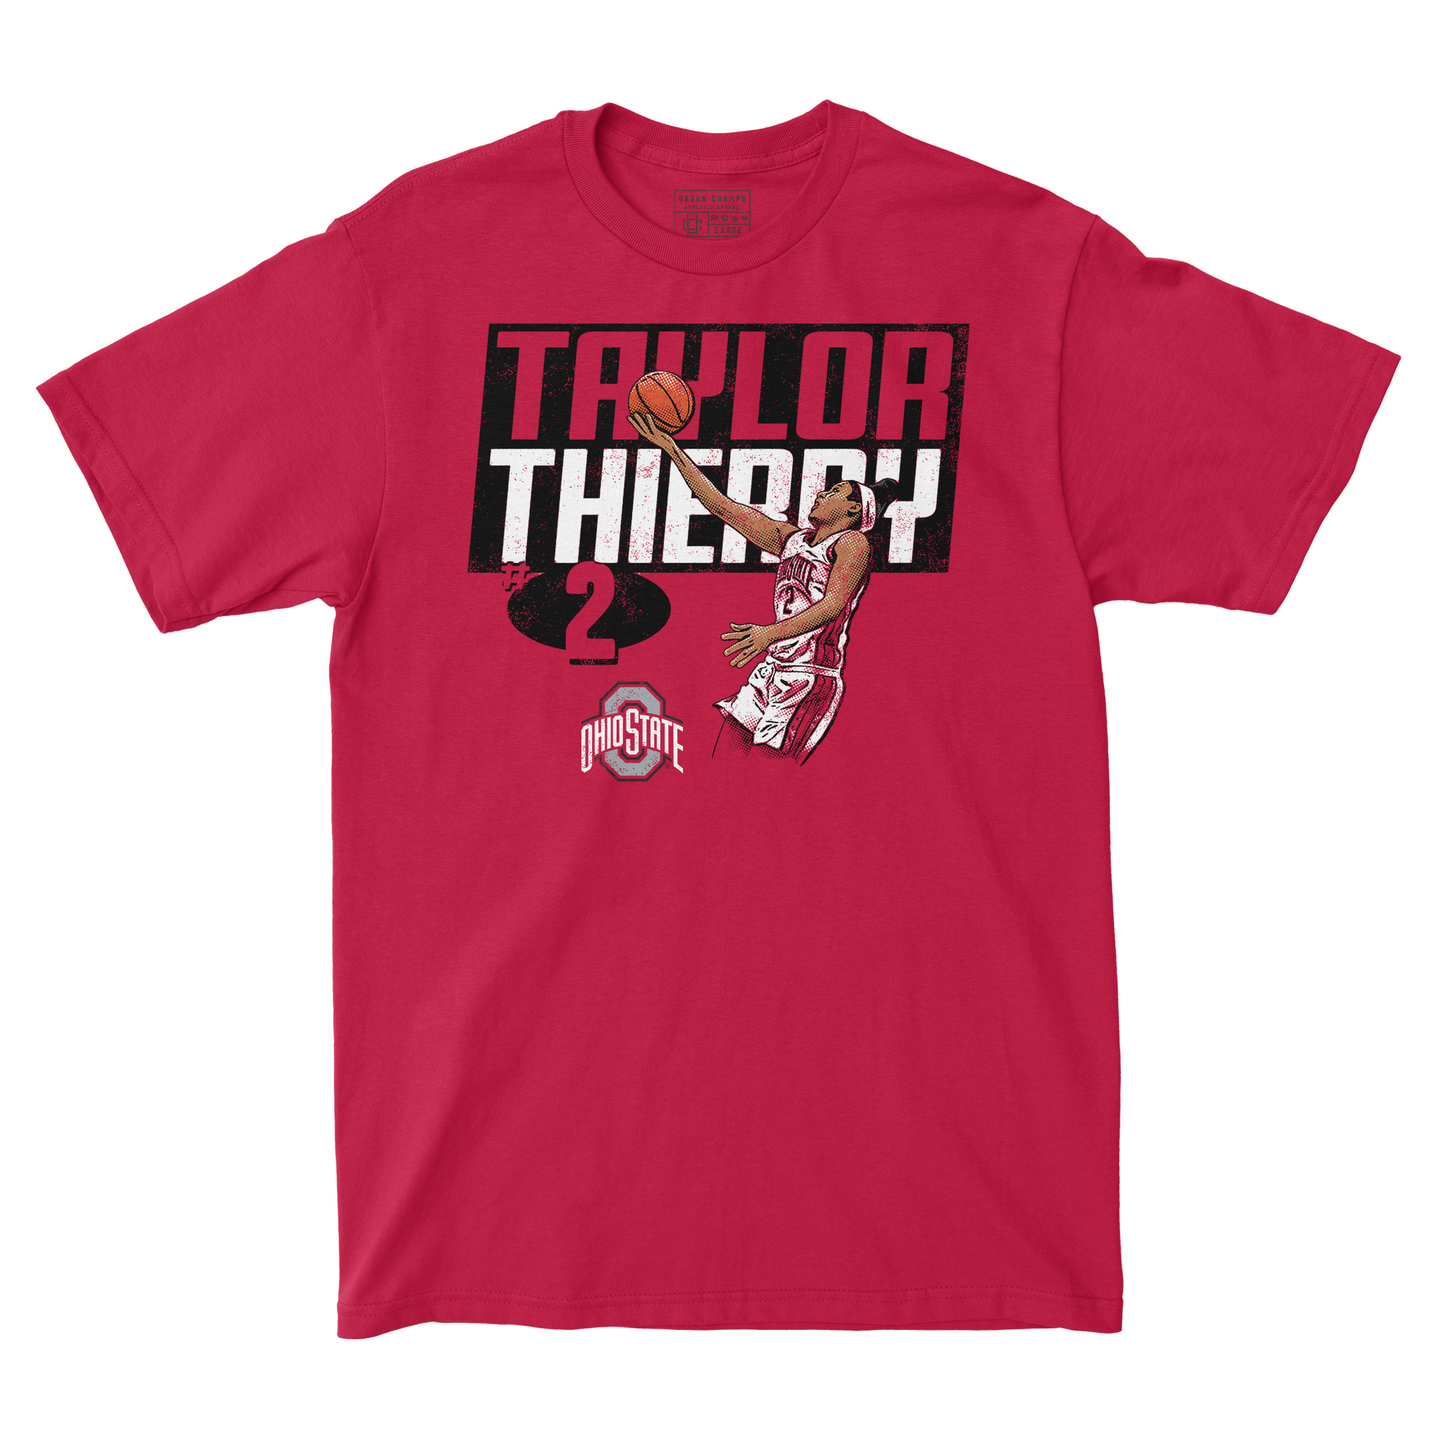 EXCLUSIVE RELEASE: Taylor Thierry Layup Tee